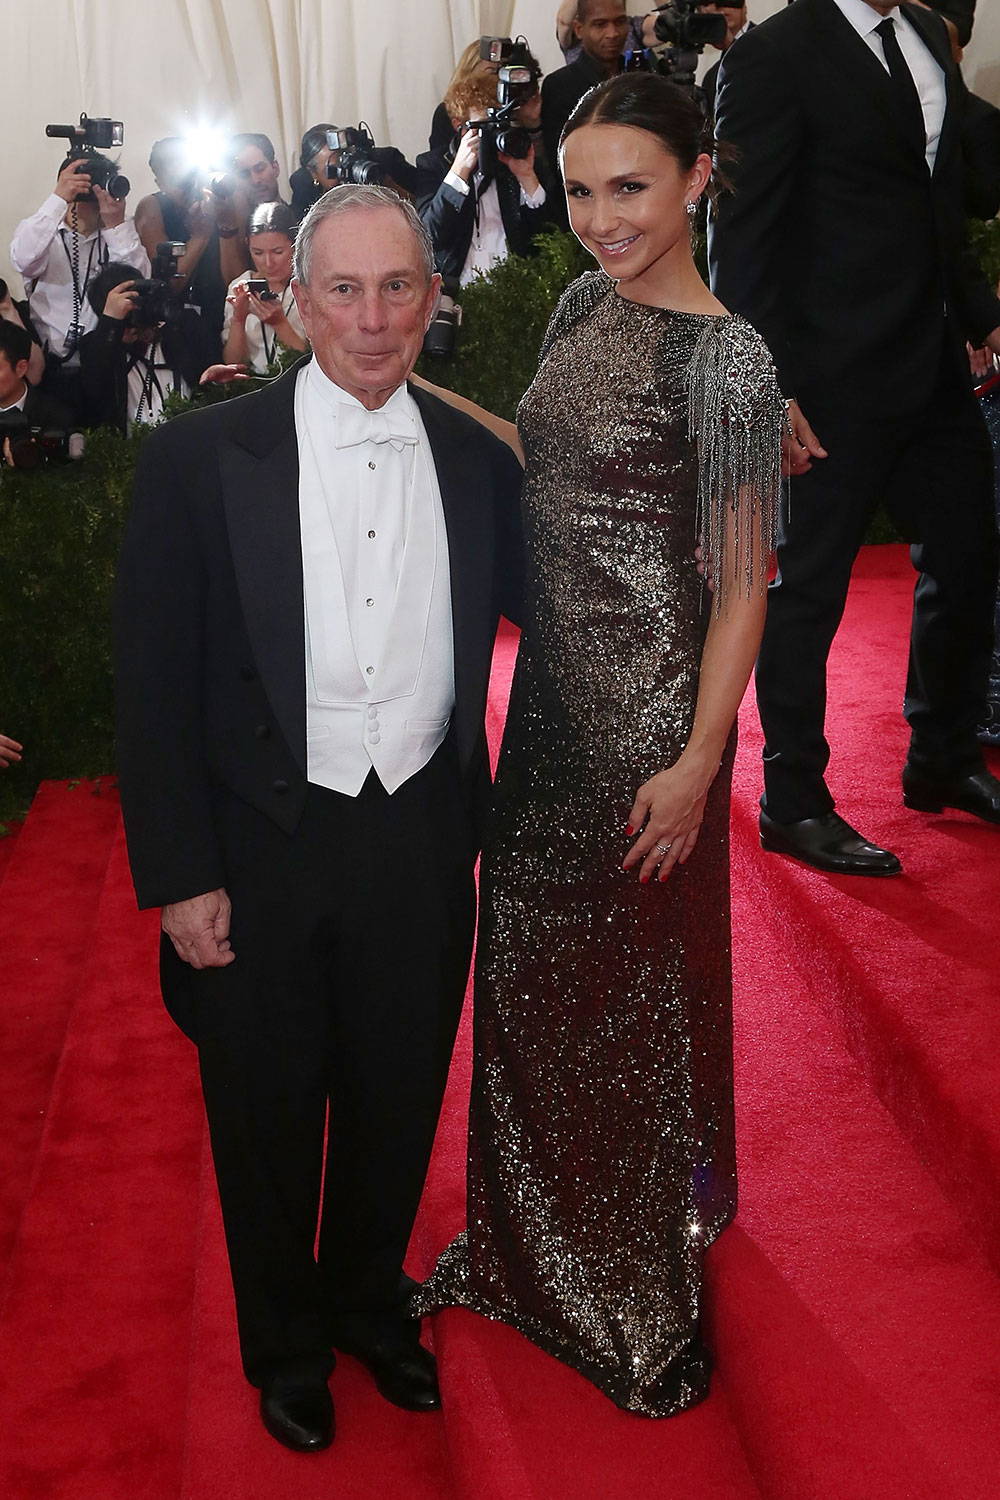 Georgina, daughter of former New York mayor Michael Bloomberg, looked stunning in Badgley Mischka Couture at the Met Gala 2015.